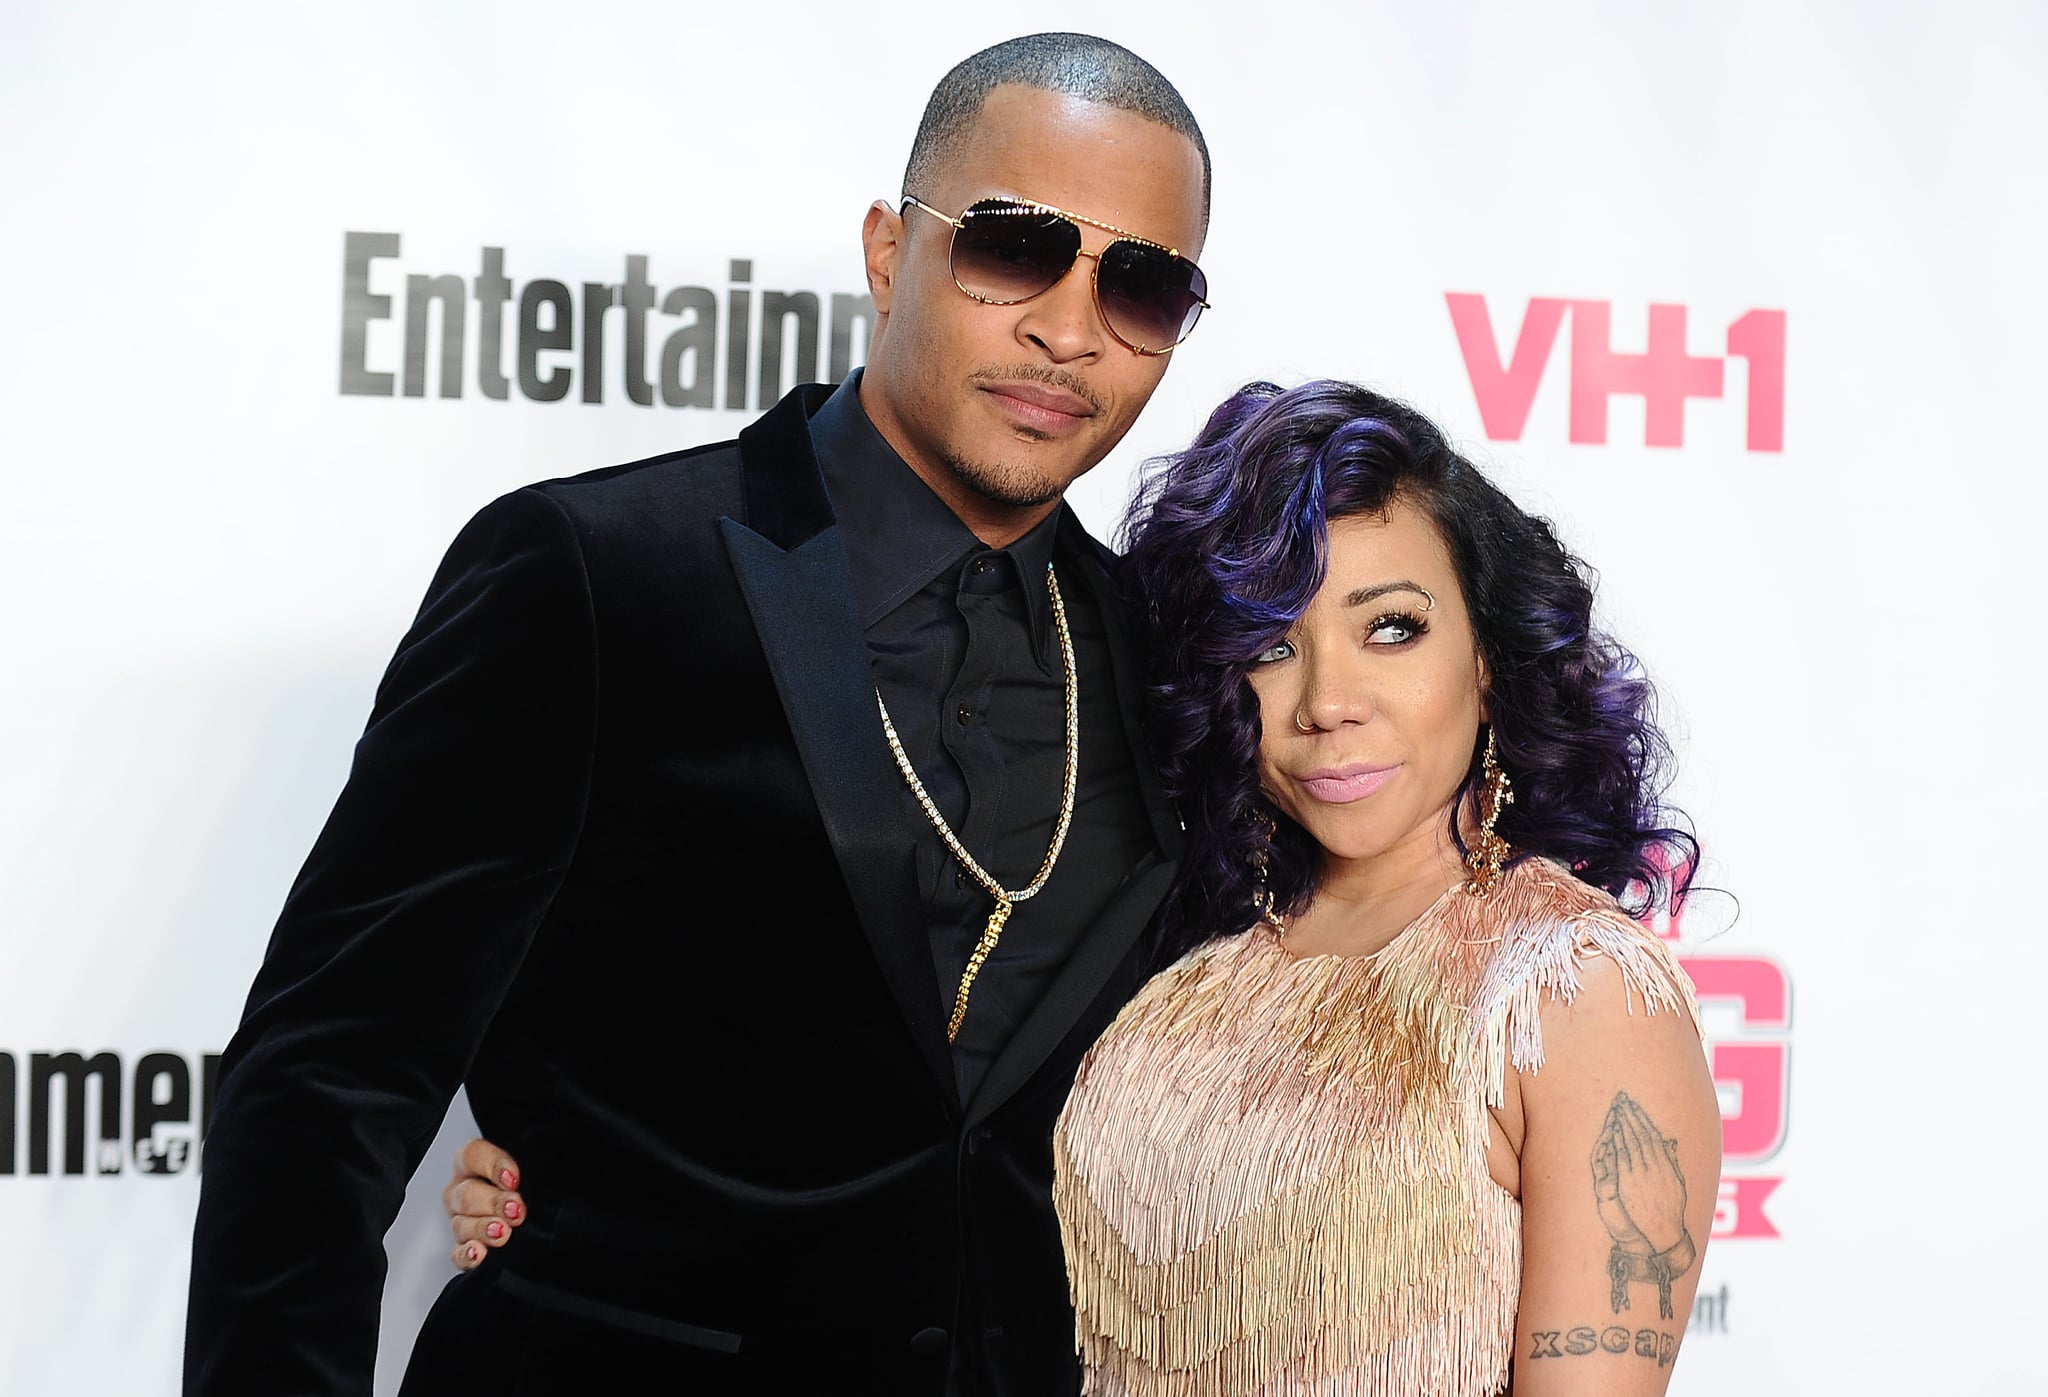 WEST HOLLYWOOD, CA - NOVEMBER 15:  Rapper T.I. and Tameka 'Tiny' Cottle-Harris attend the VH1 Big In 2015 with Entertainment Weekly Awards at Pacific Design Center on November 15, 2015 in West Hollywood, California.  (Photo by Jason LaVeris/FilmMagic)